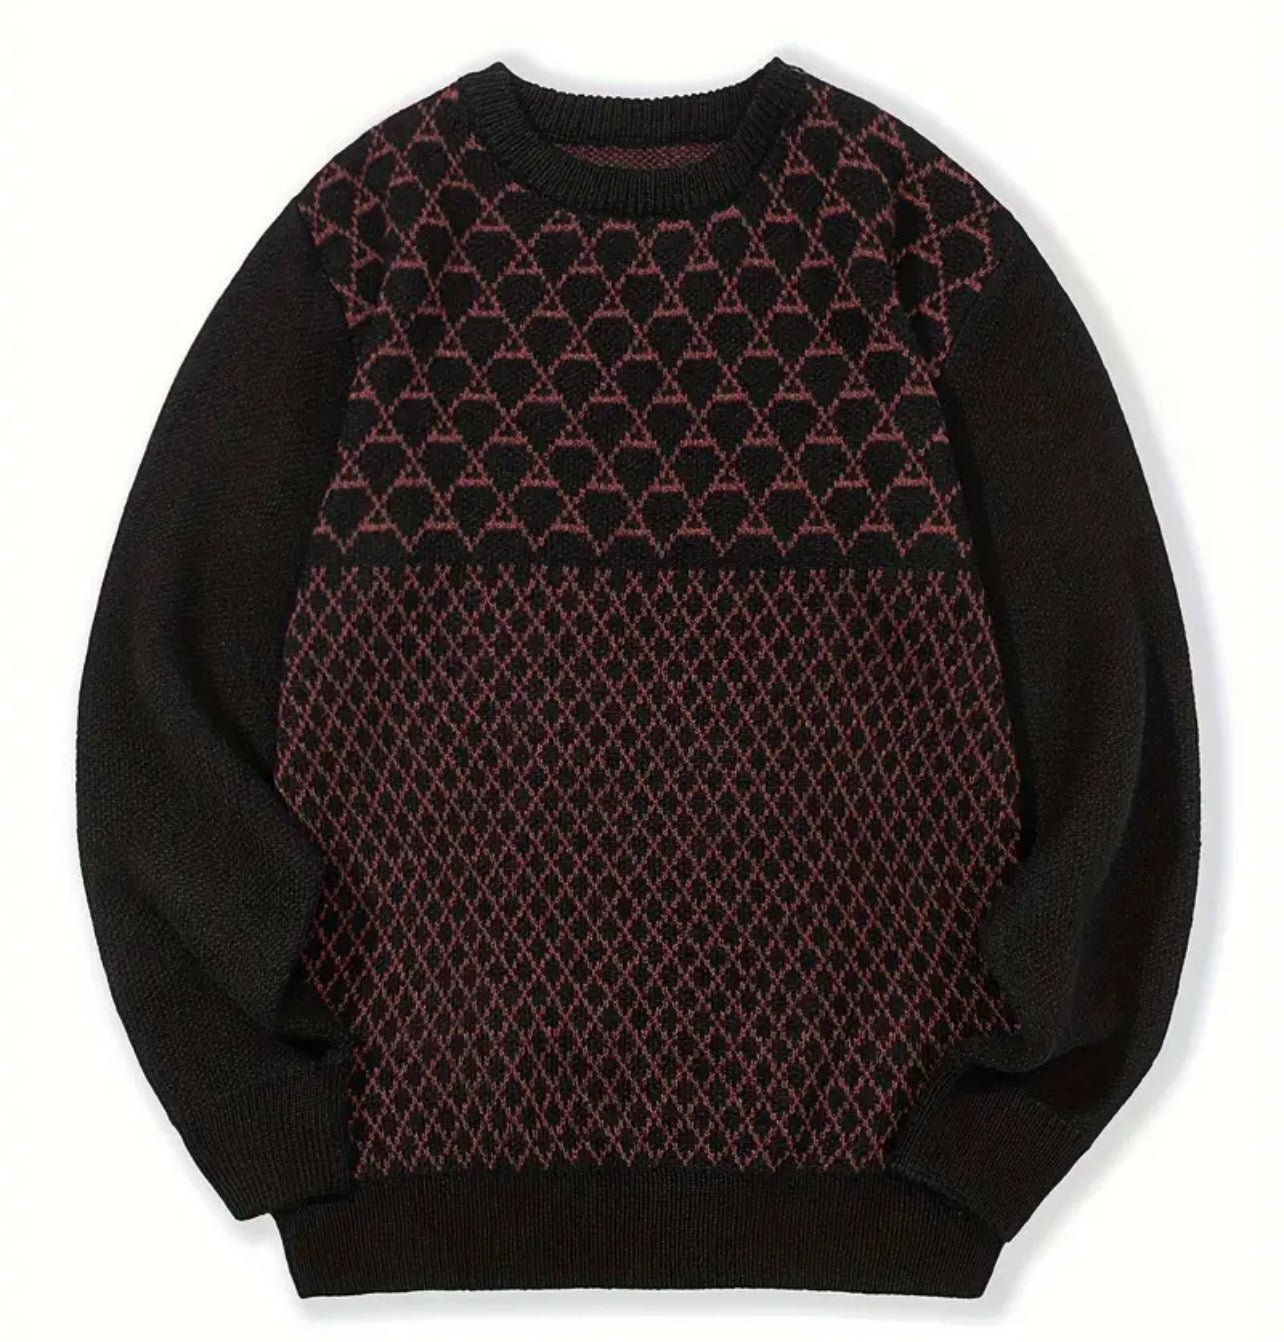 Men’s Knitted Diamond Pattern Sweater, for the Modern Man, S-4XL